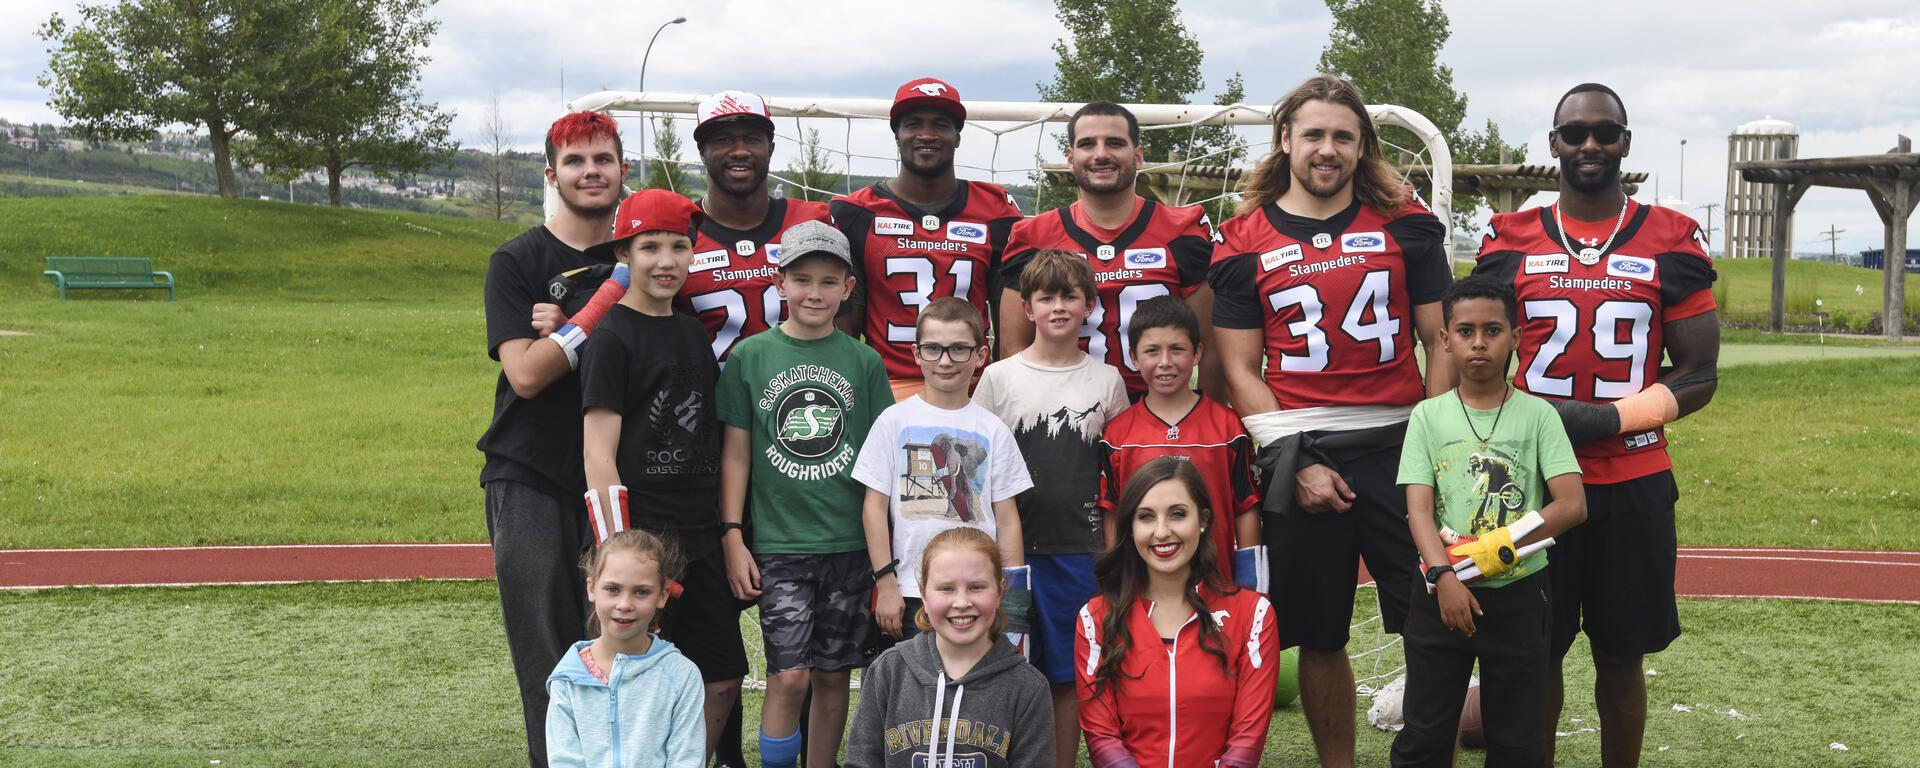 Campers with Stampeders